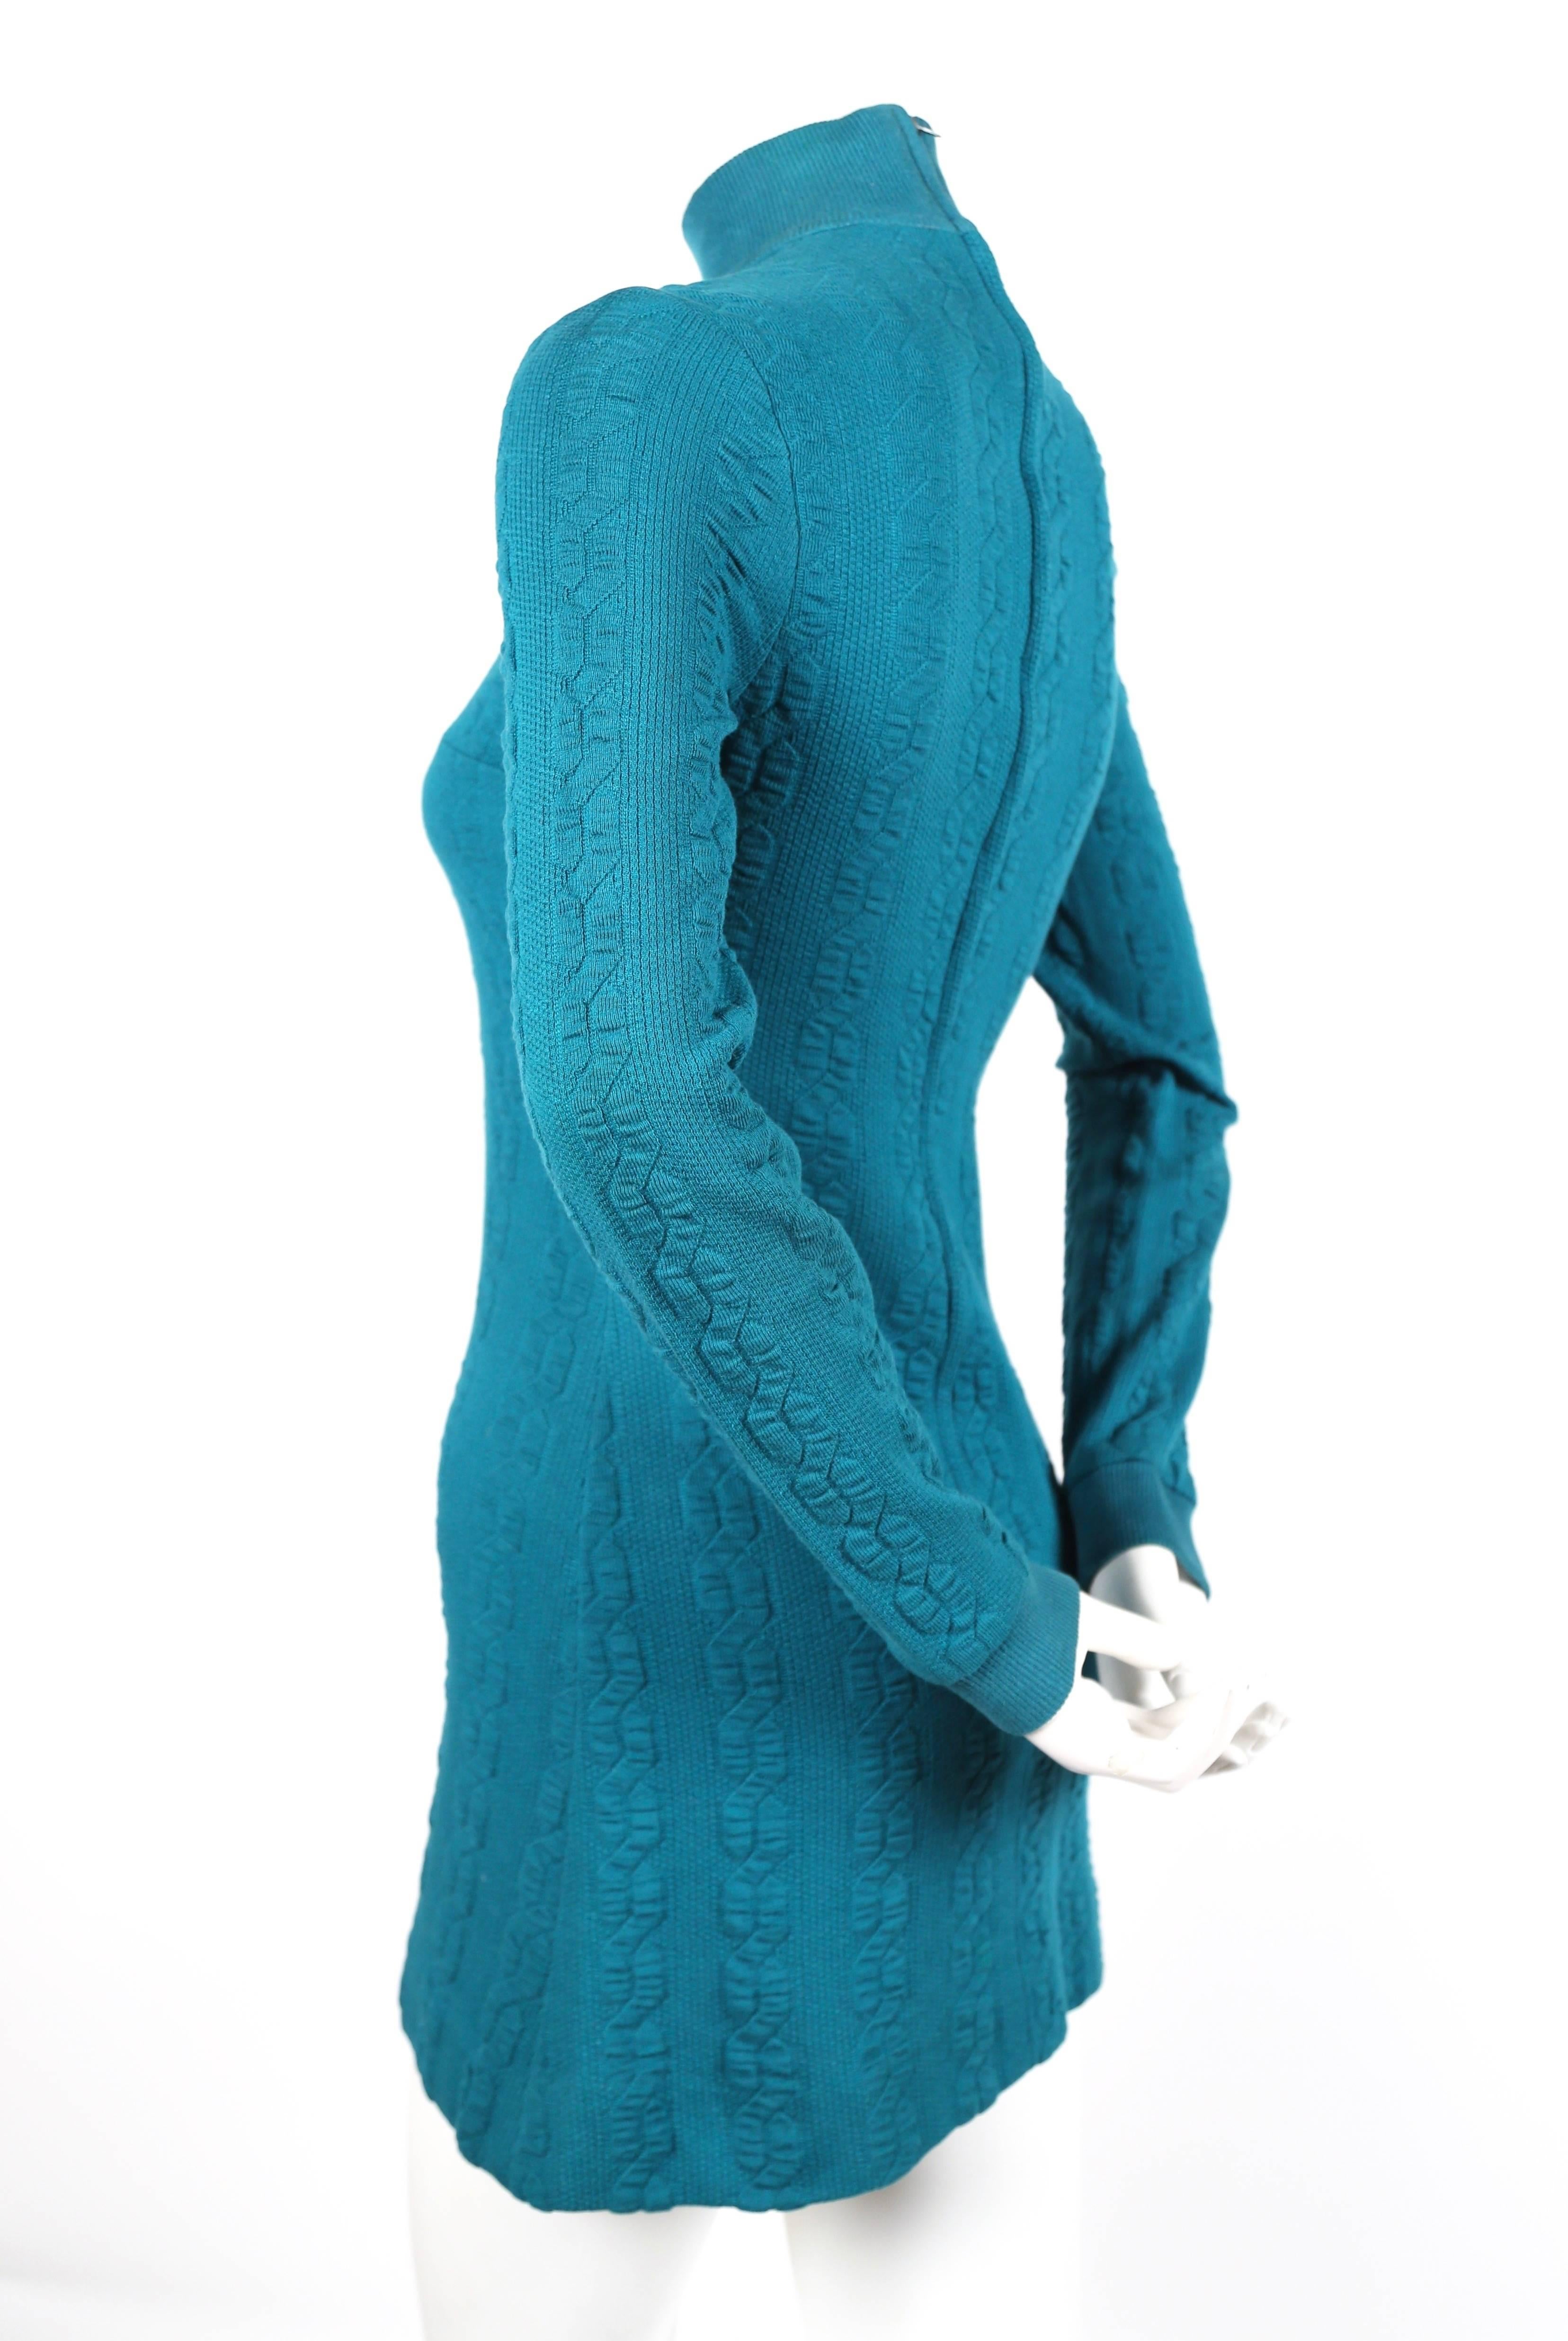 Turquoise cotton jersey mini dress designed by Betsey Johnson for Paraphernalia dating to the late 1960's. This dress is a very rare example of Betsey Johnson's earliest work as a designer. Dress is best suited for an extra-small or small.